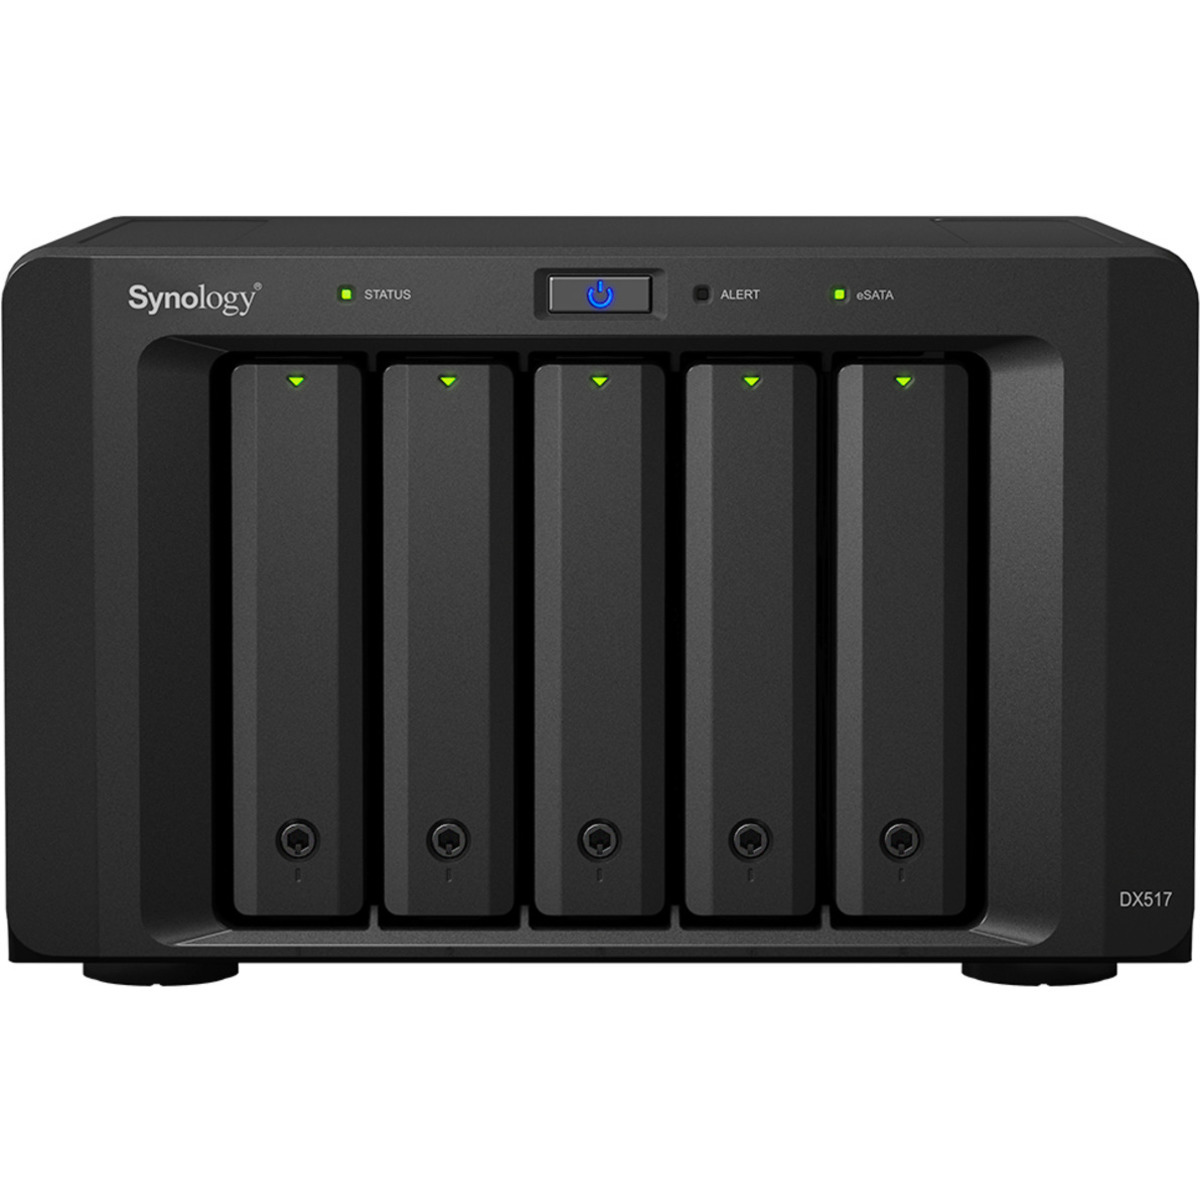 buy $1826 Synology DX517 40tb Desktop Expansion Enclosure 5x8000gb Toshiba Enterprise Capacity MG08ADA800E 3.5 7200rpm SATA 6Gb/s HDD ENTERPRISE Class Drives Installed - Burn-In Tested - ON SALE - nas headquarters buy network attached storage server device das new raid-5 free shipping usa christmas new year holiday sale DX517